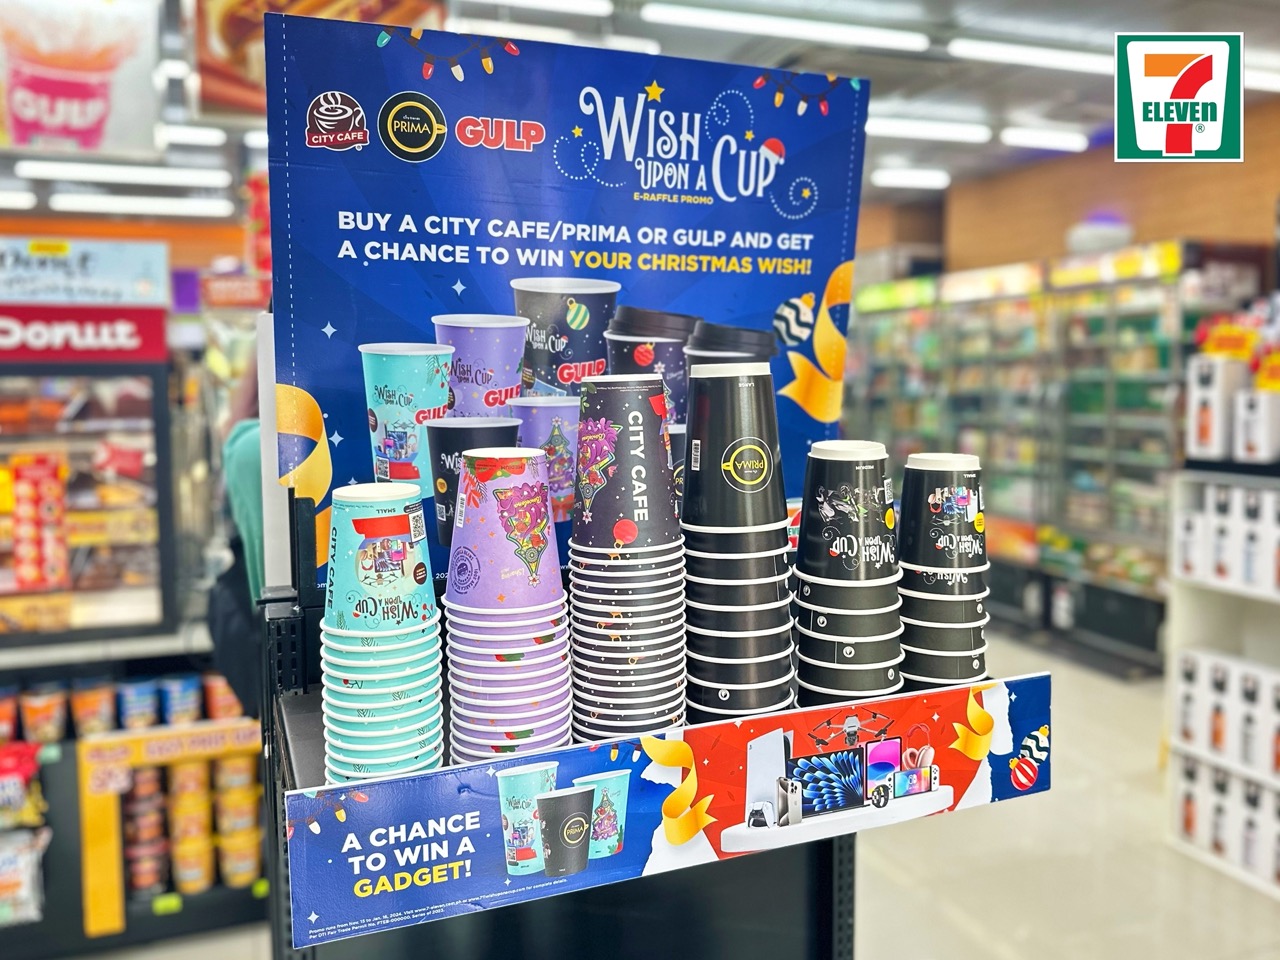 The Philippines' leading neighborhood convenience store is set to amp up the holiday and turn Christmas dreams into reality with the "Wish Upon A Cup" raffle promo. 